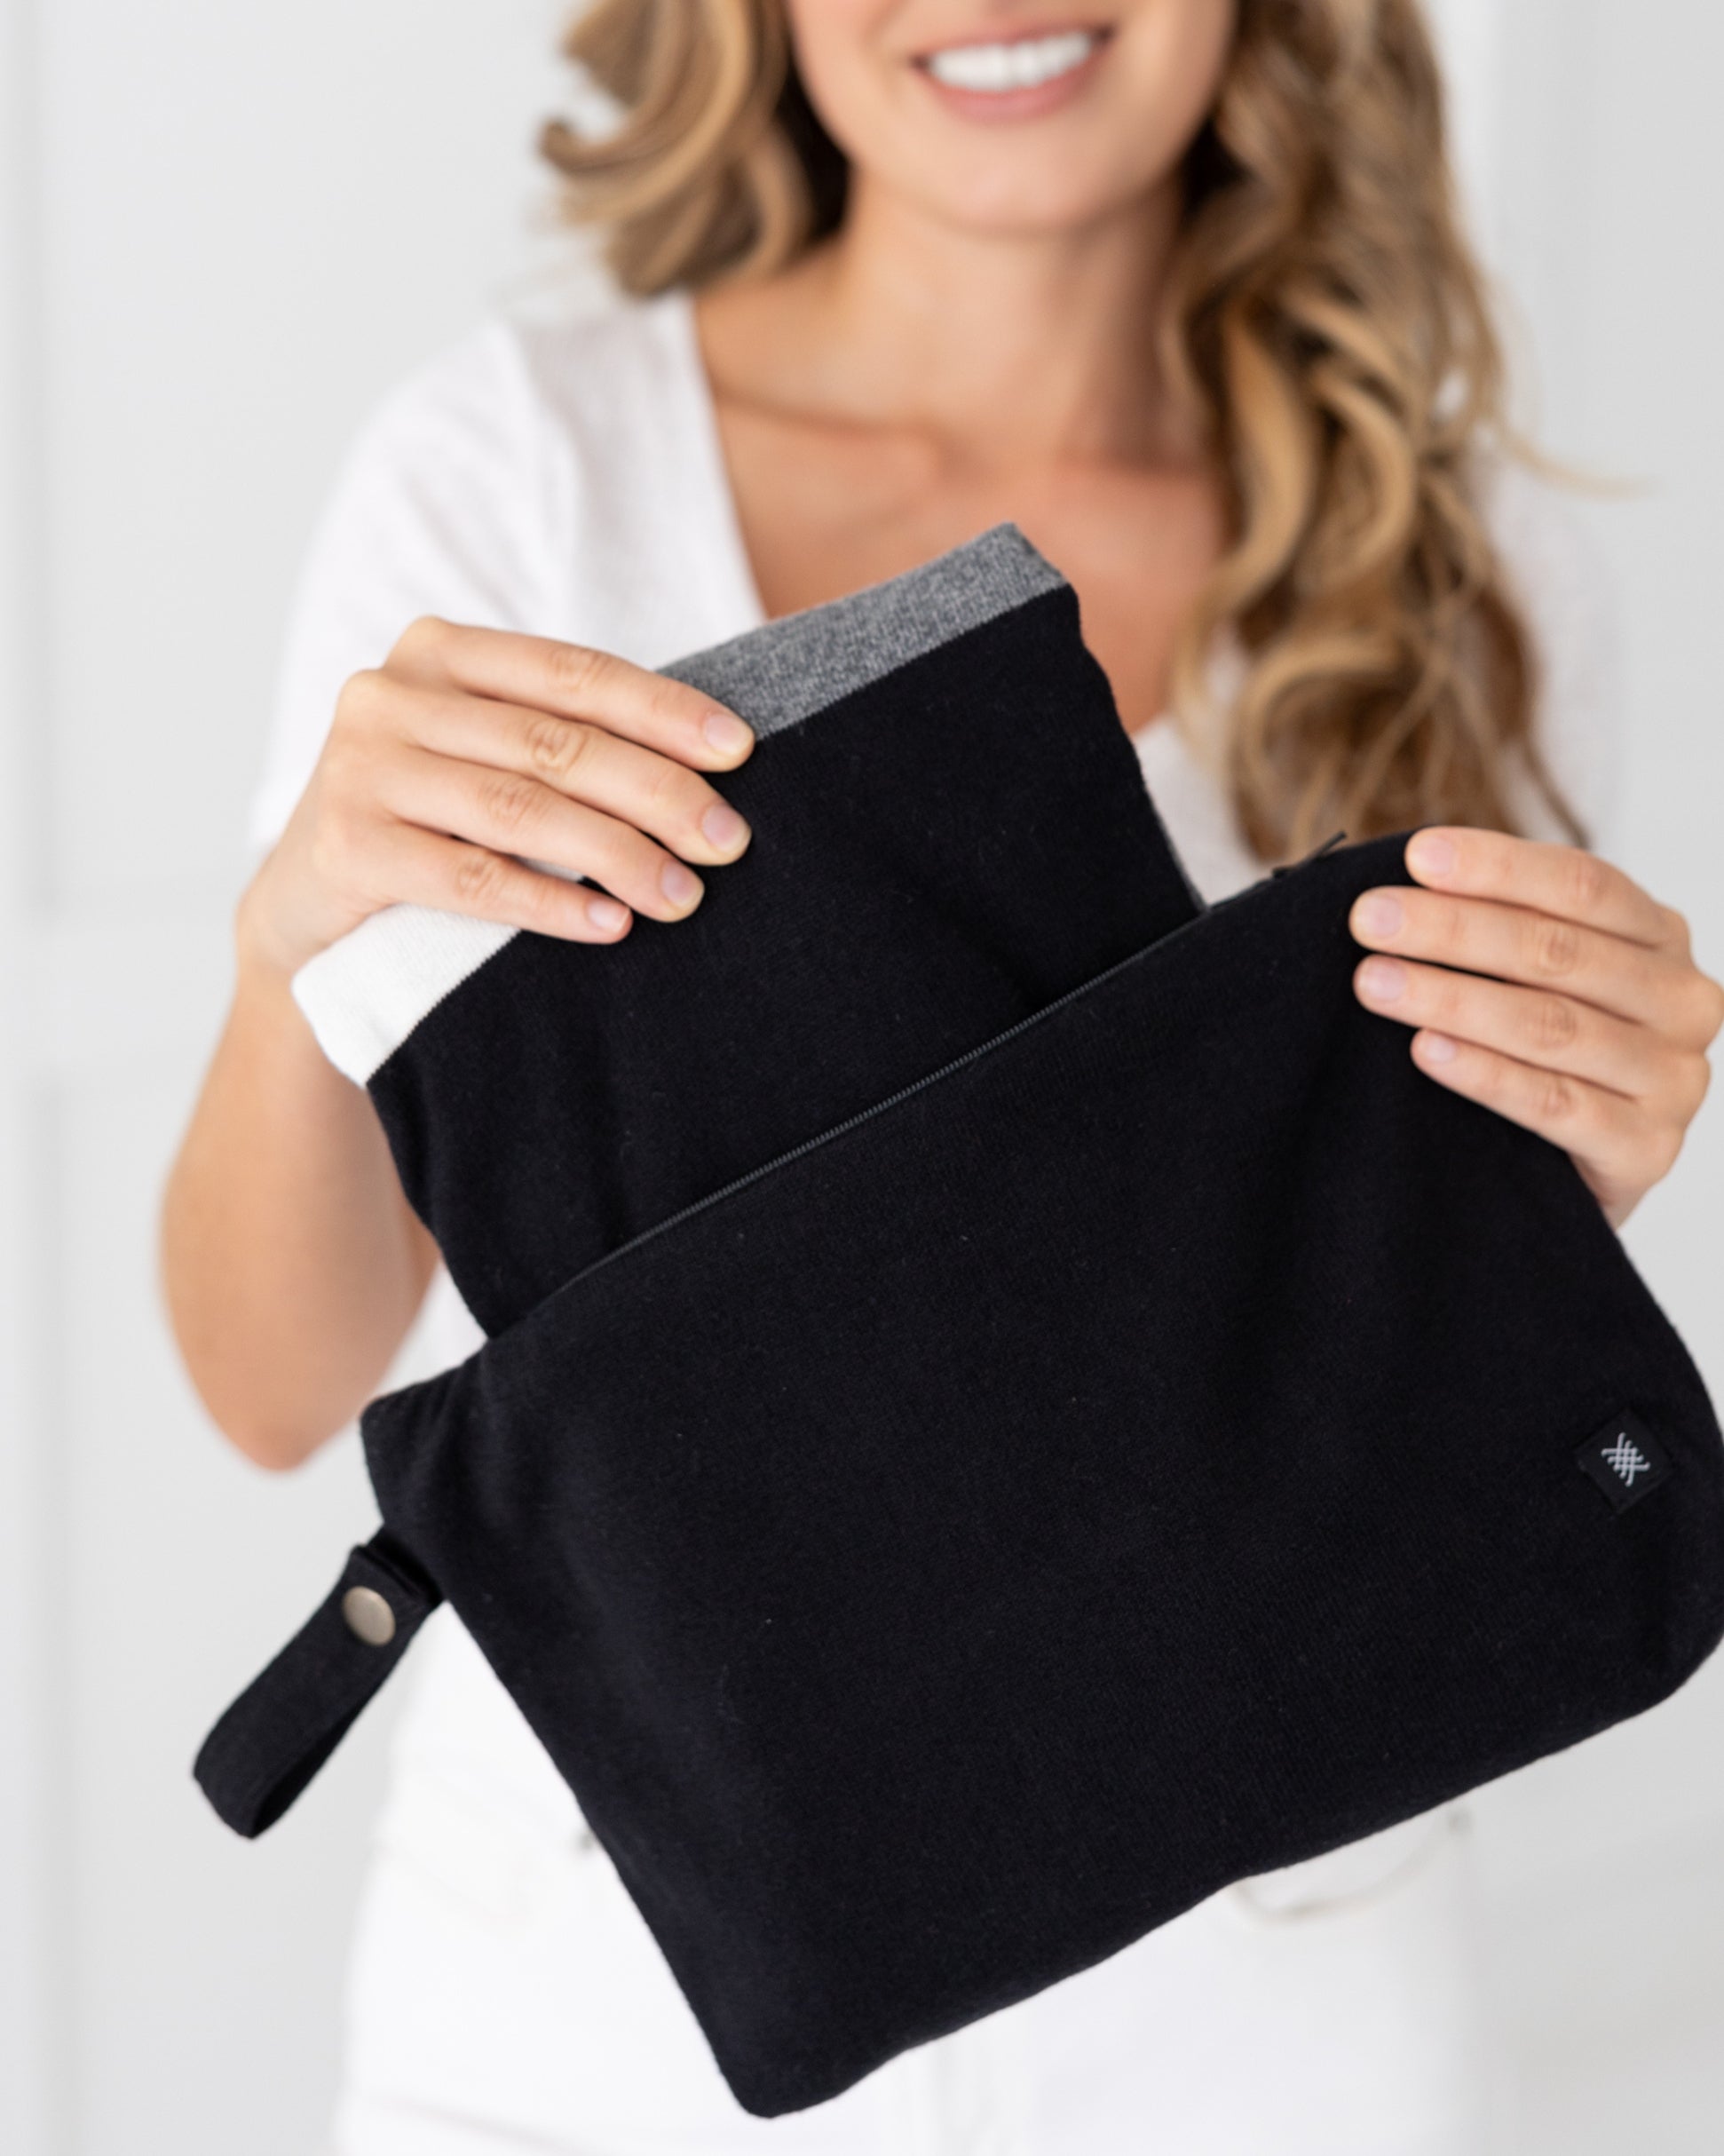 Woman holding Black Carry Pouch, which can hold the Dreamsoft Travel Scarf